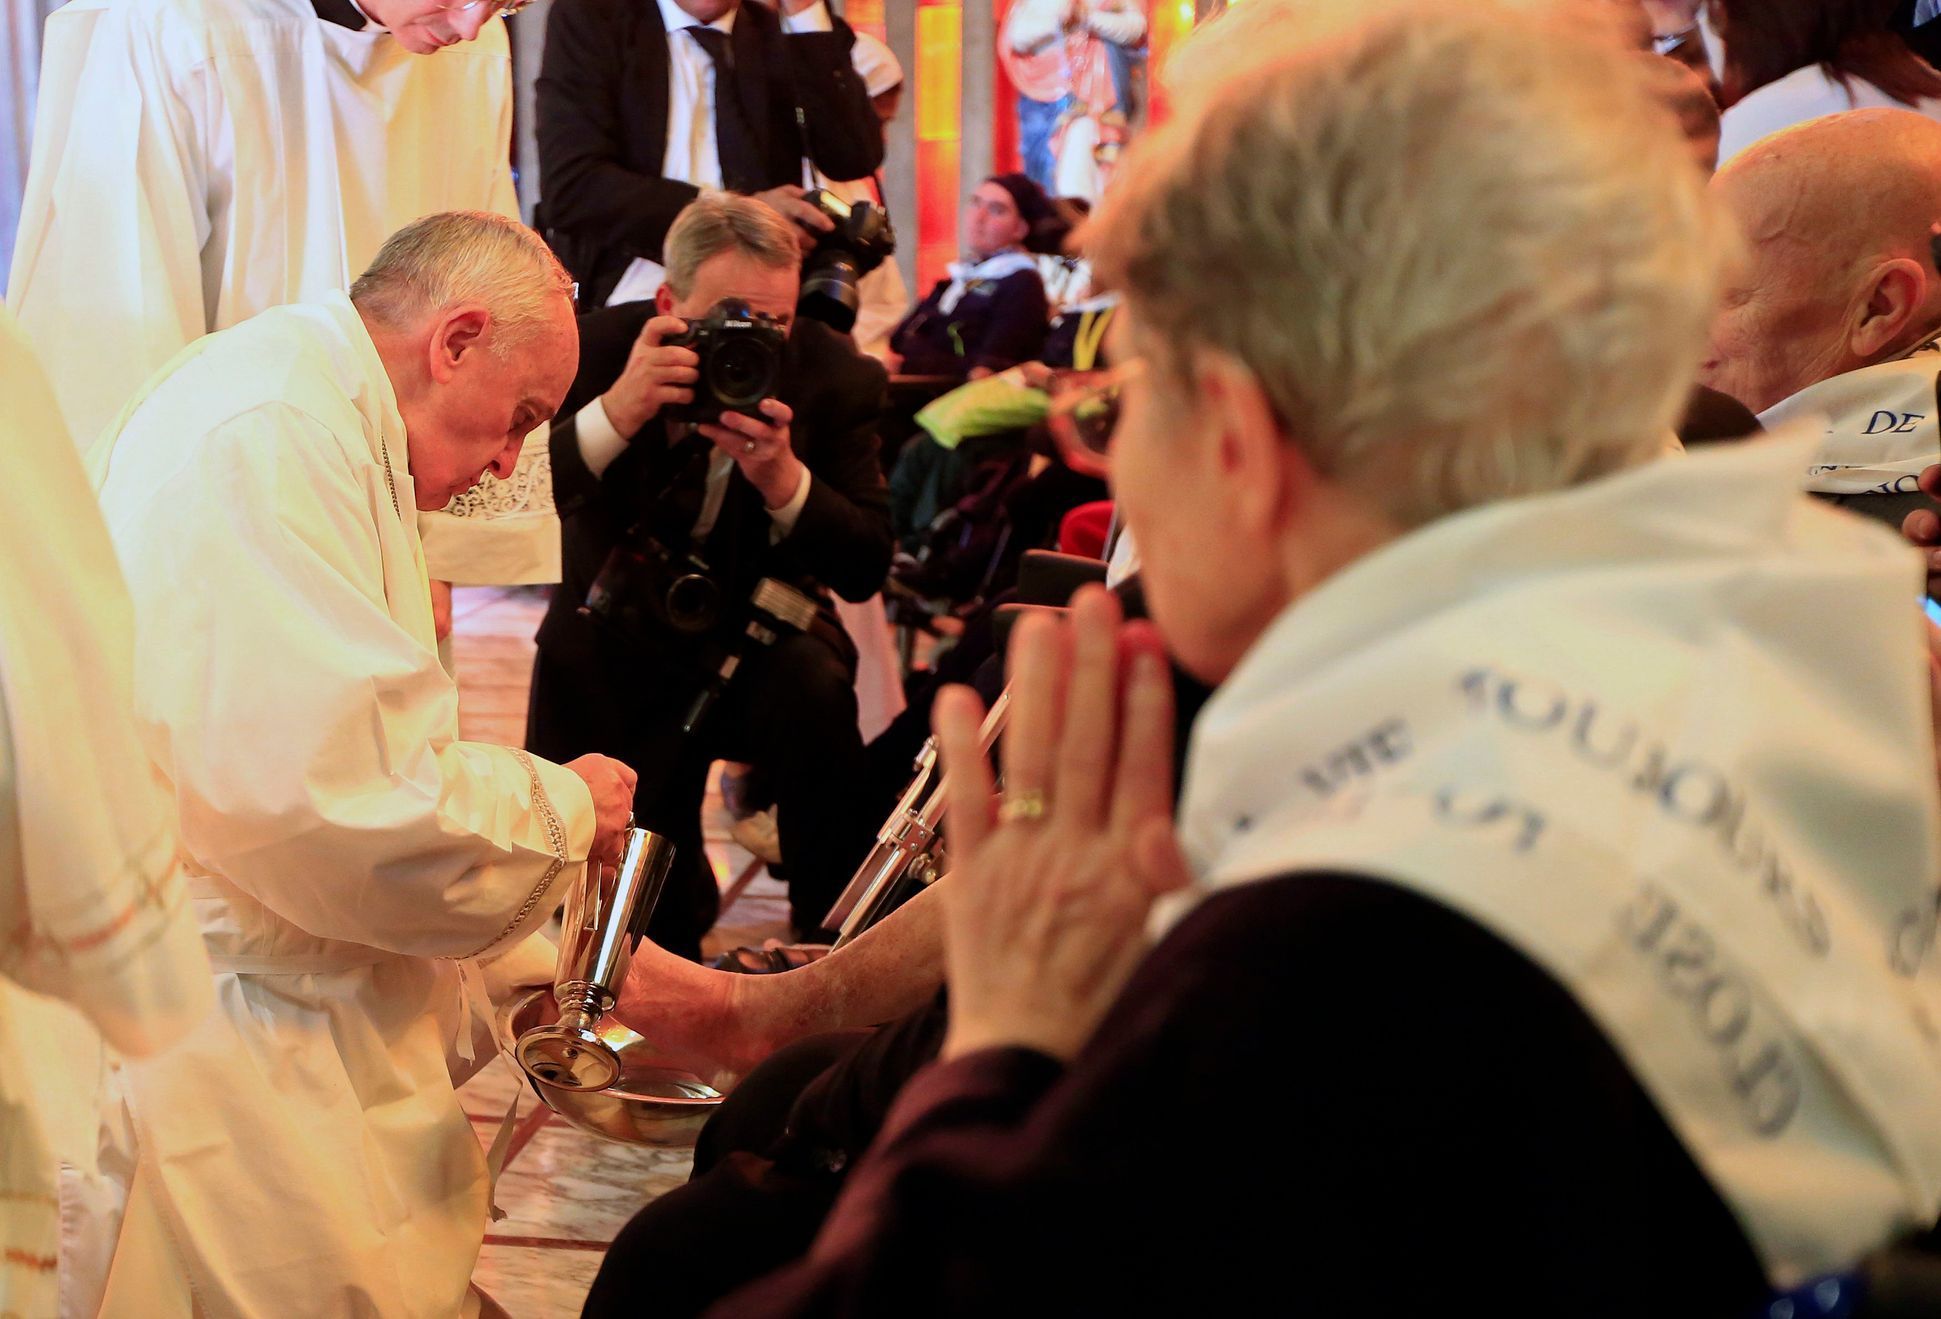 Pope Francis washes a foot of a disabled person at the S. Maria della Provvidenza church in Rome